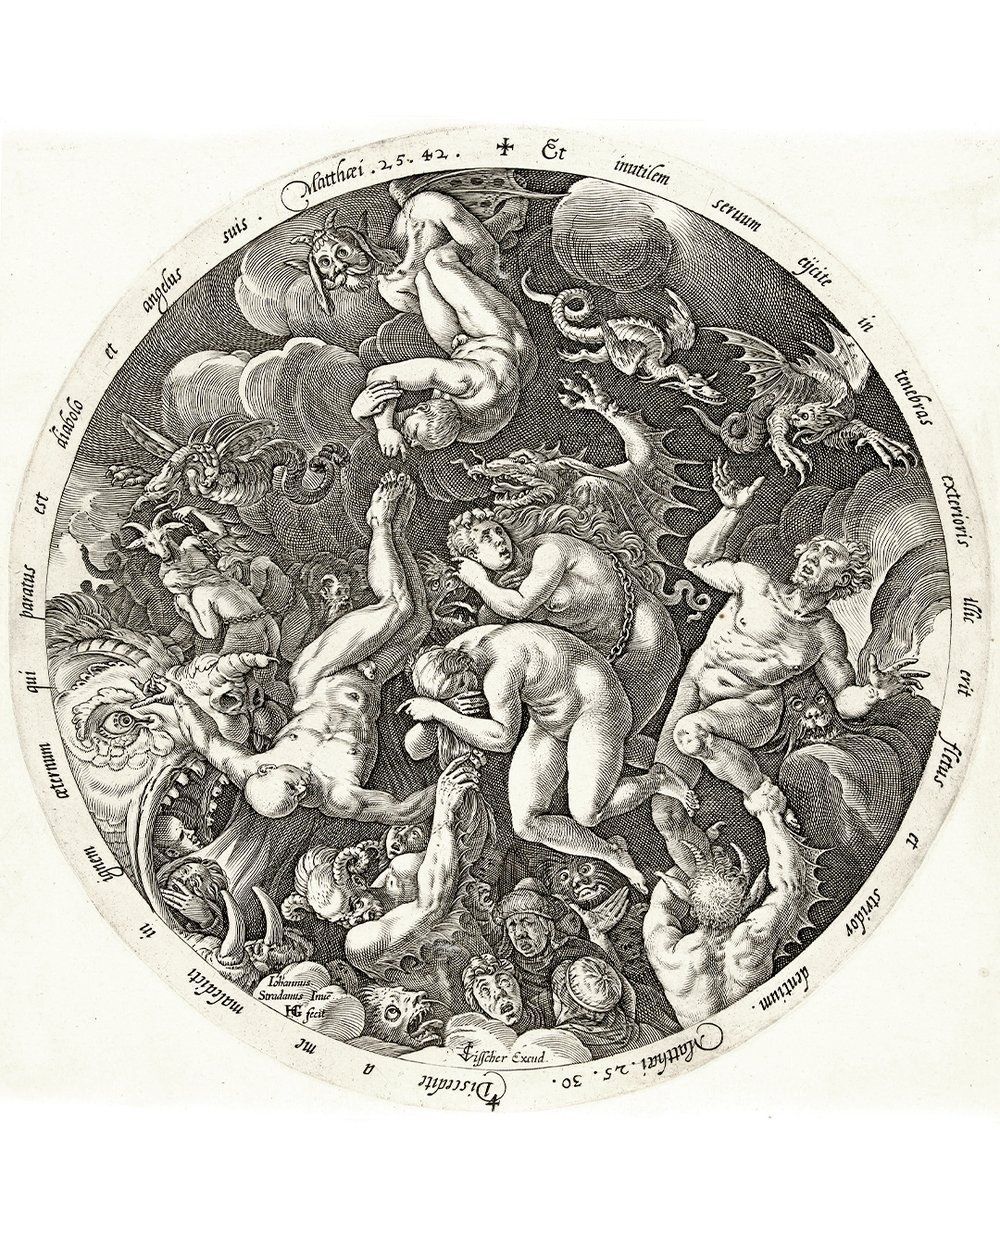 "The cursed enter hell" (1596 - 1652)